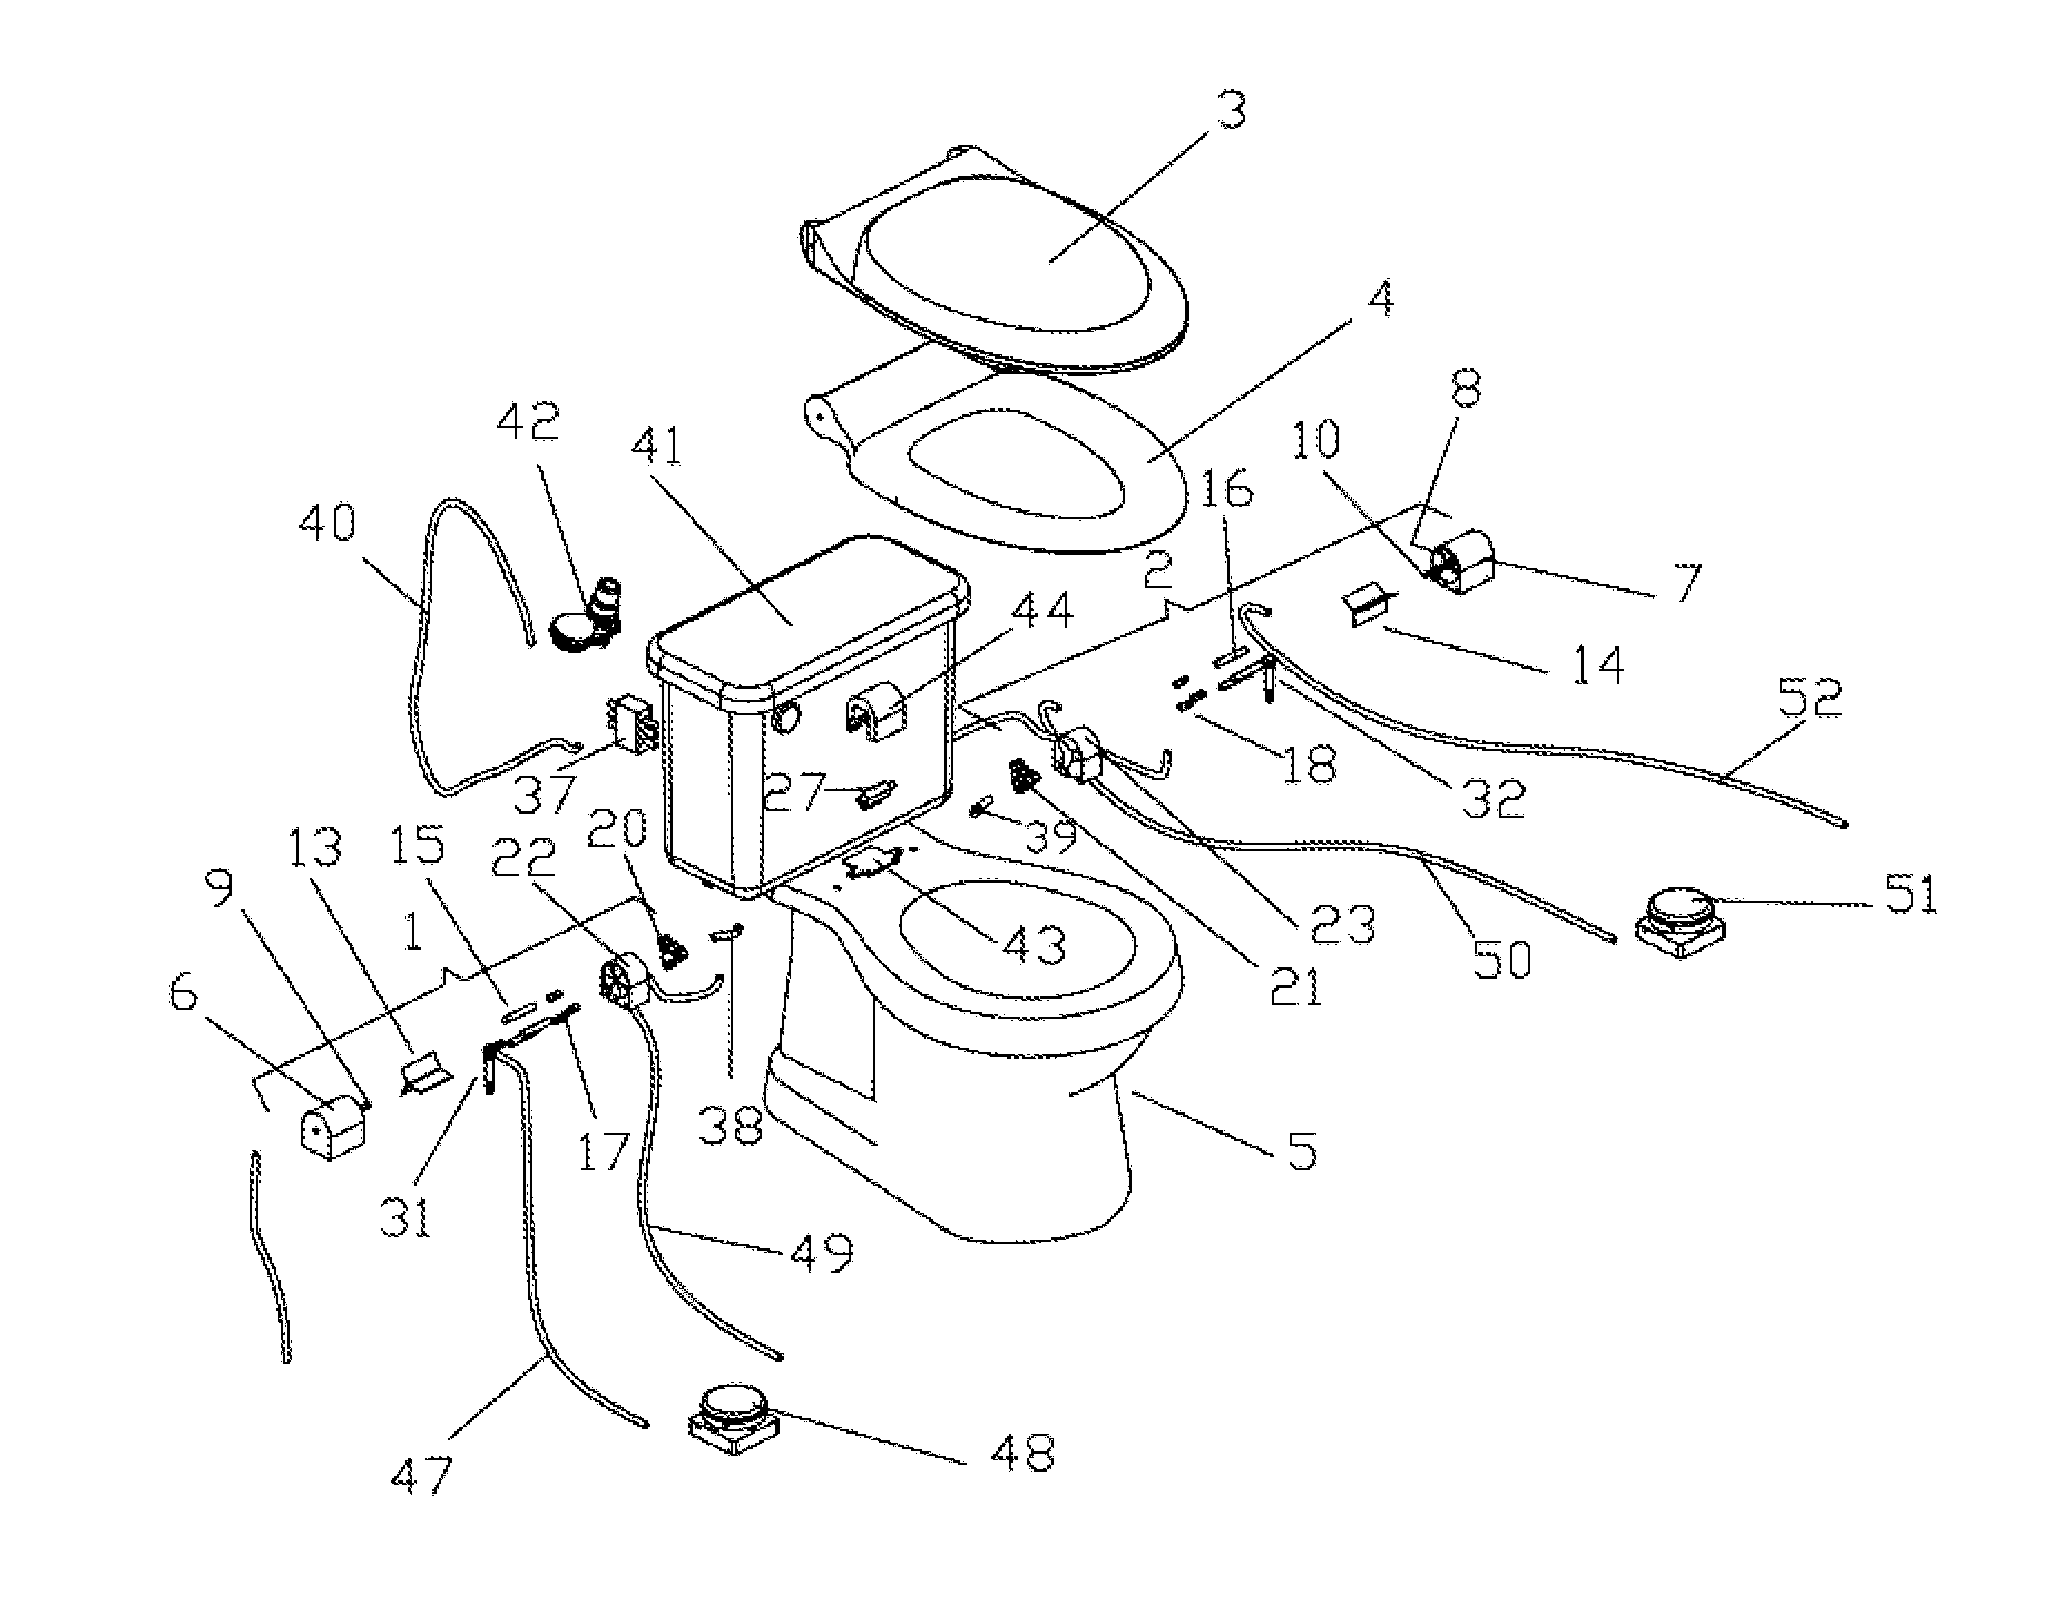 Hydraulic atuator device for raising and lowering a  seat and lid